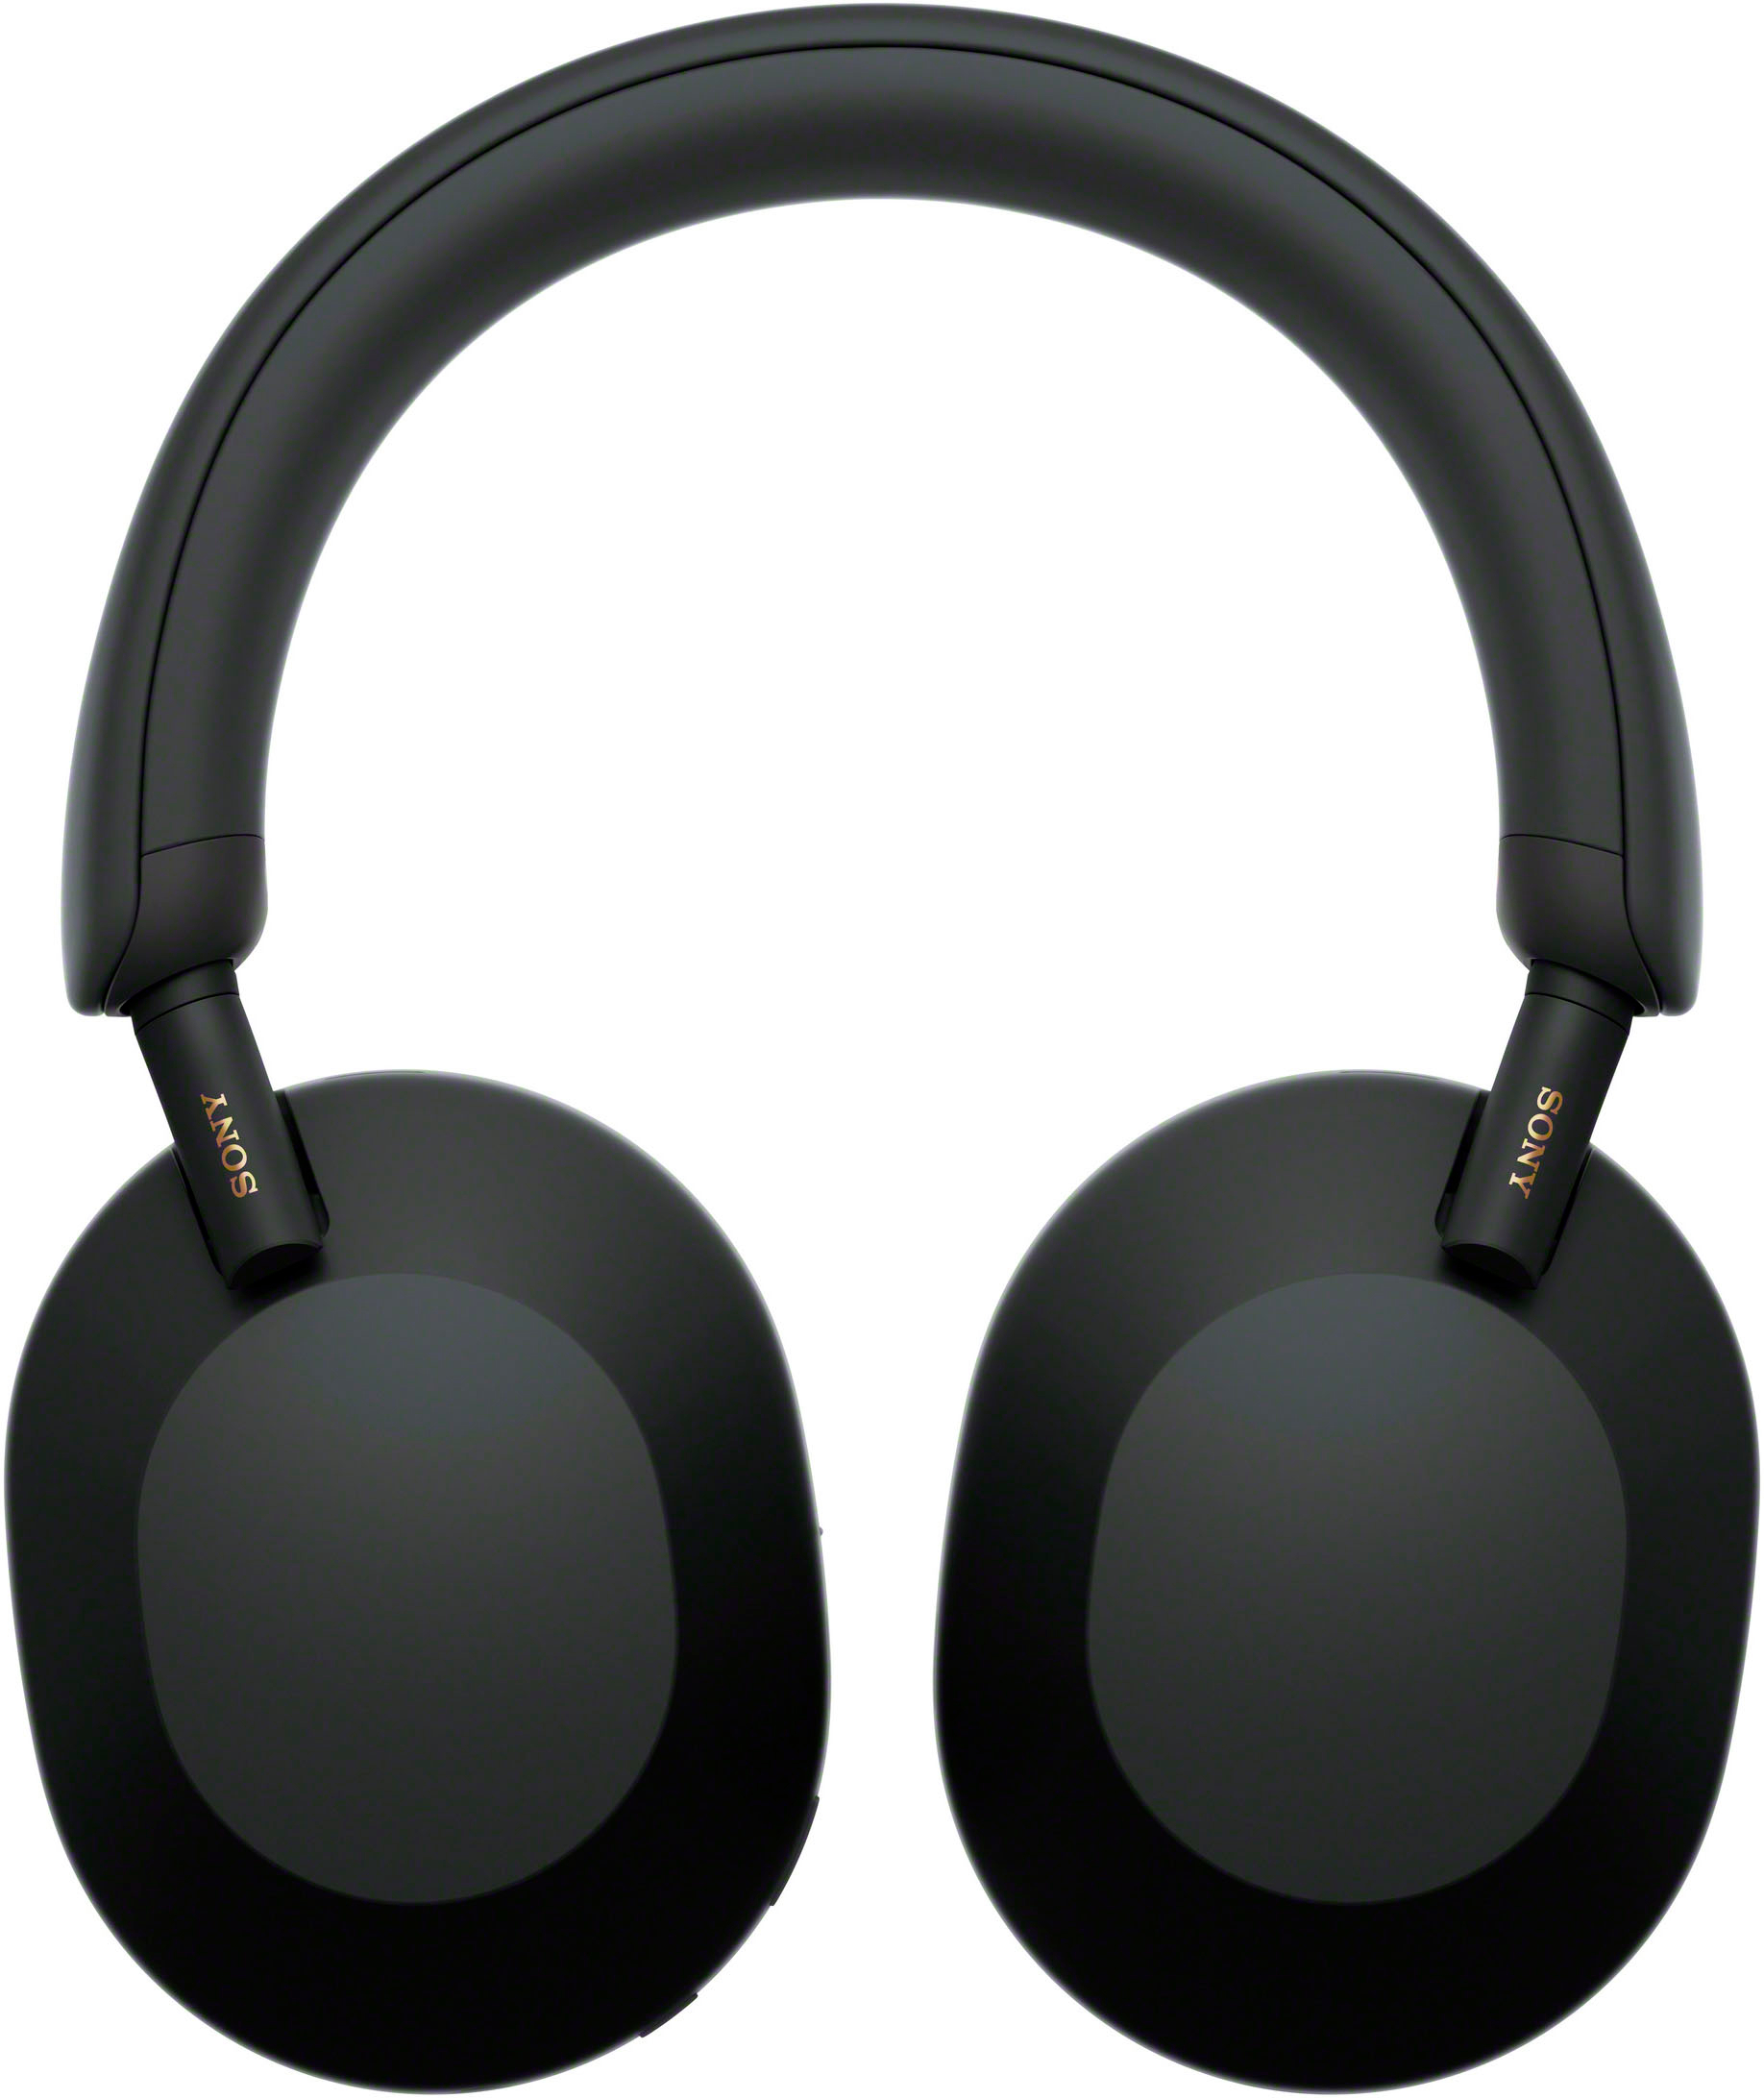 Sony WH-1000XM5 Wireless Noise-Canceling Over-the-Ear Headphones Black  WH-1000XM5/B - Best Buy